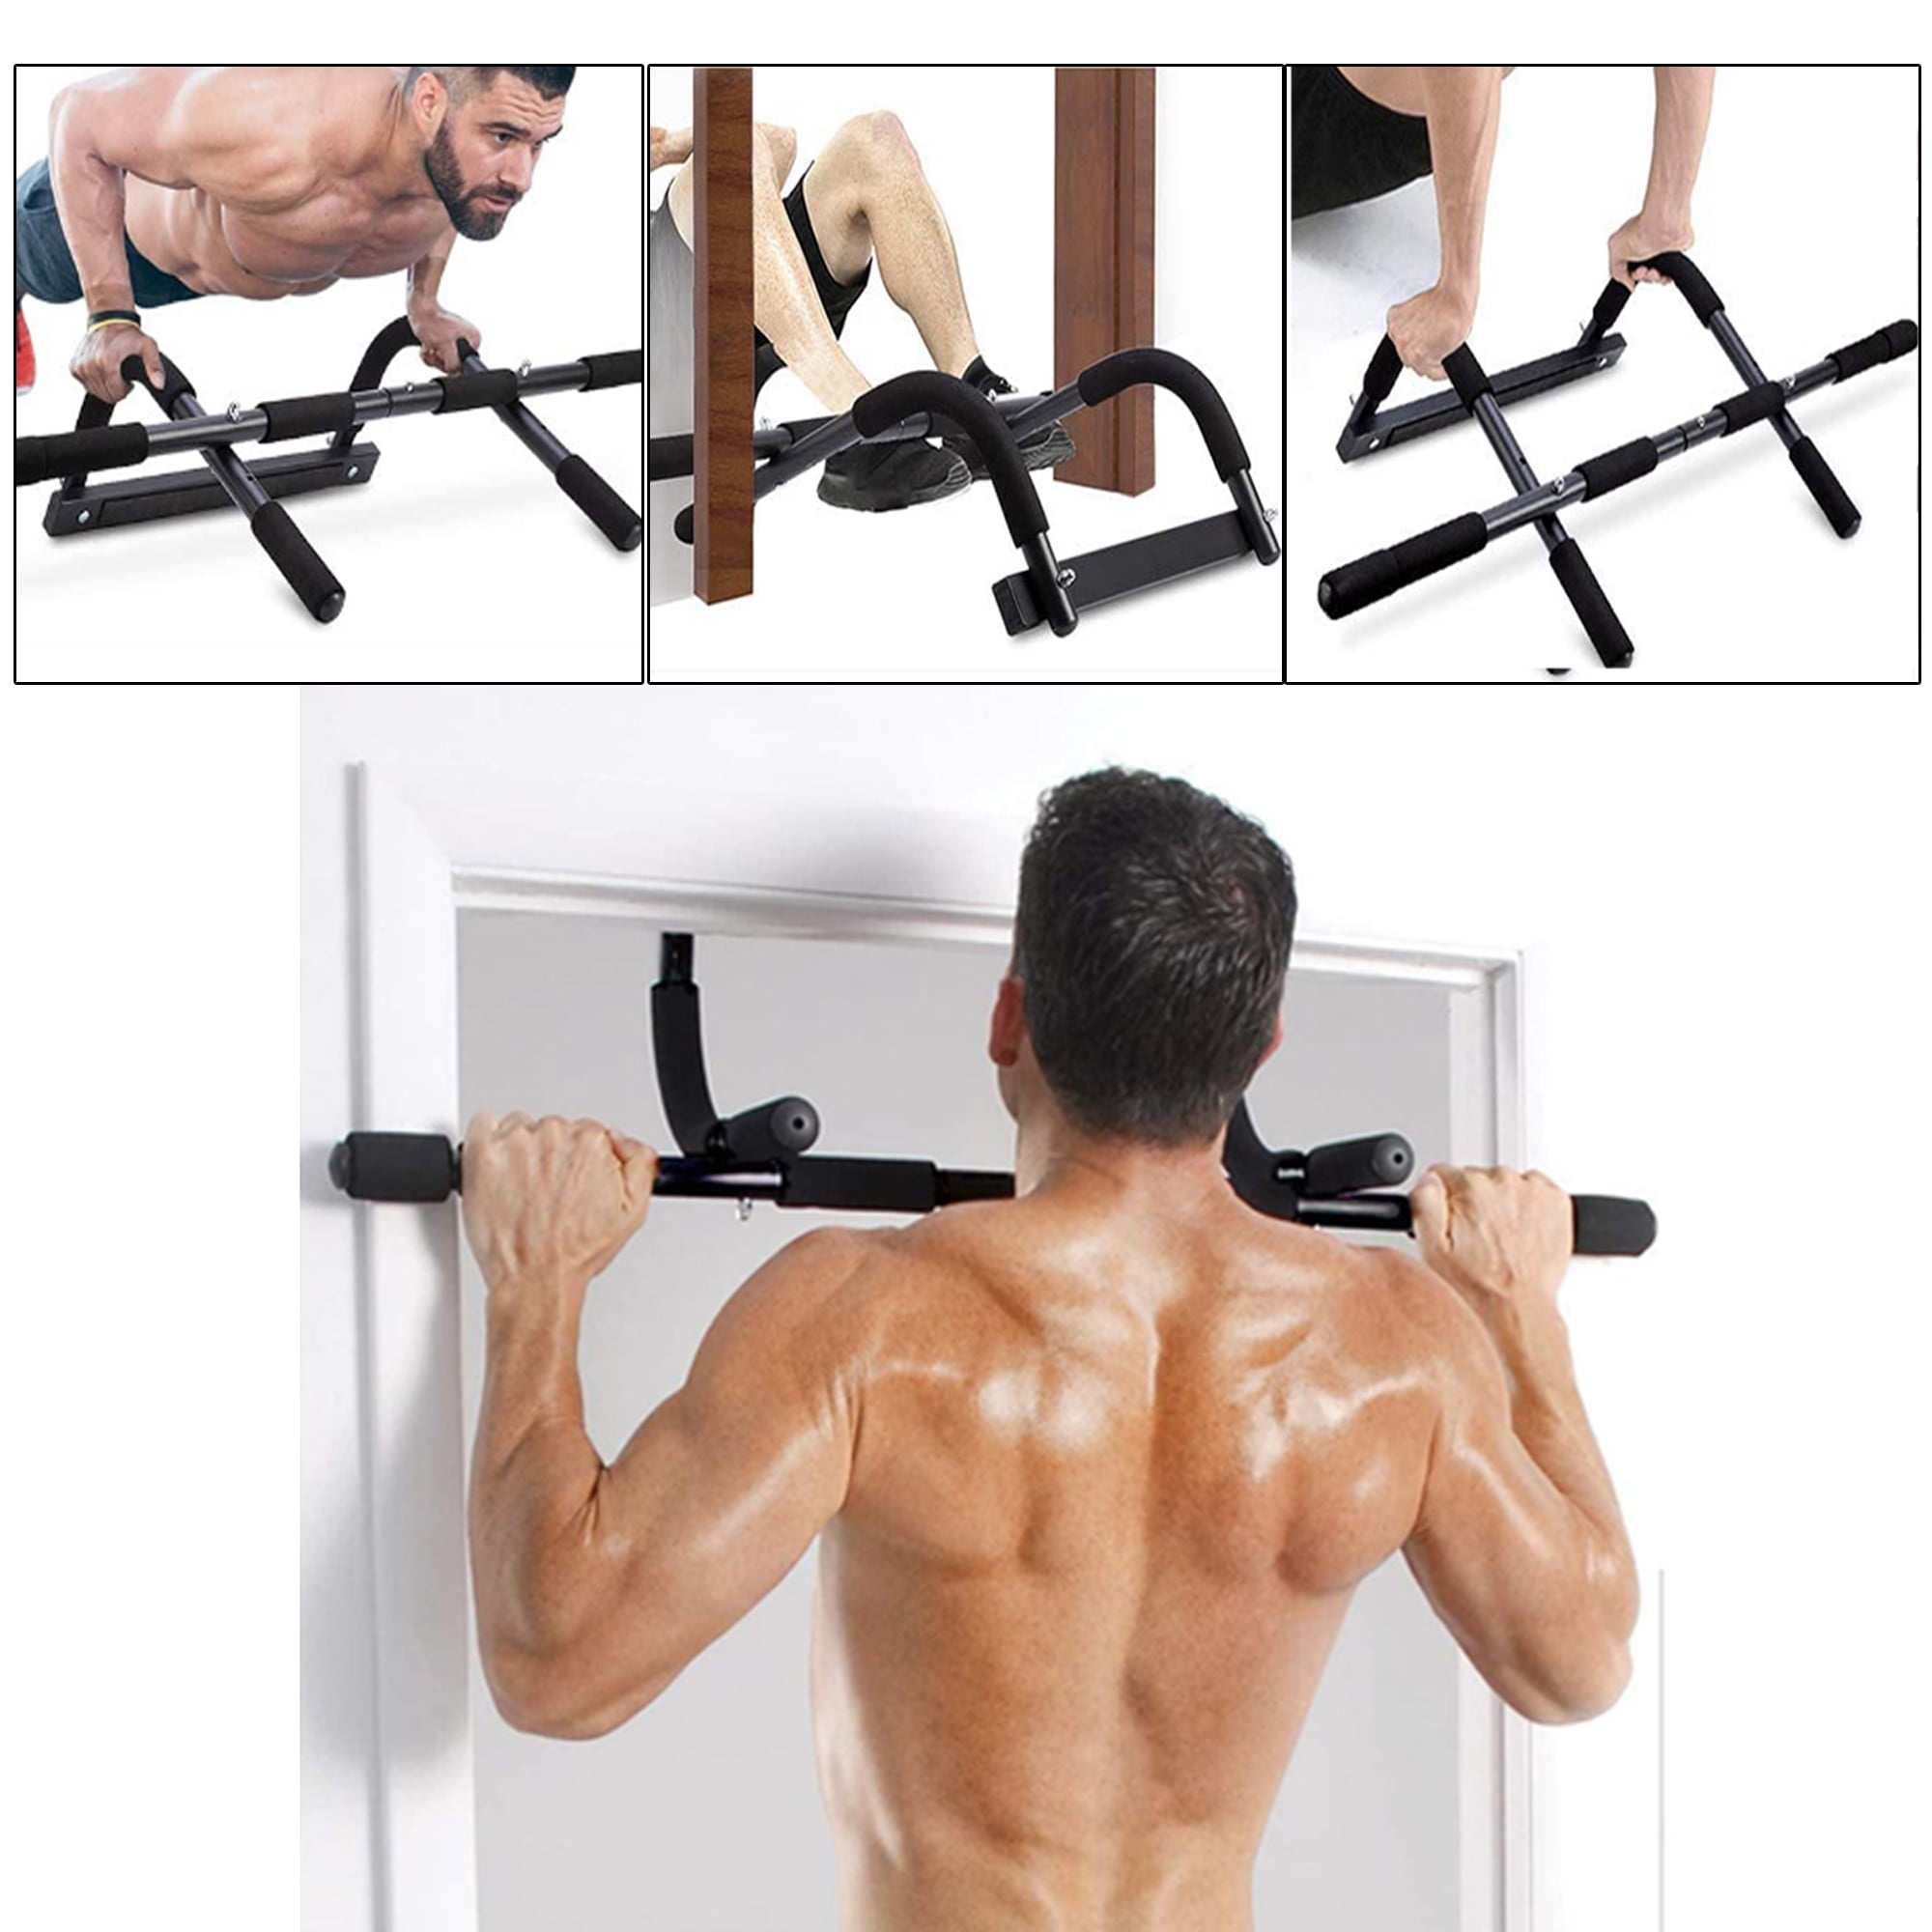 Pull up Bar Heavy-Duty Steel Floor Dips Doorway Pull Up Bar and Multi-Grip Chin-Up Chin Ups Bar Leg Raises Abdominal Exercises Total Body System Pull Up Bar for Doorway